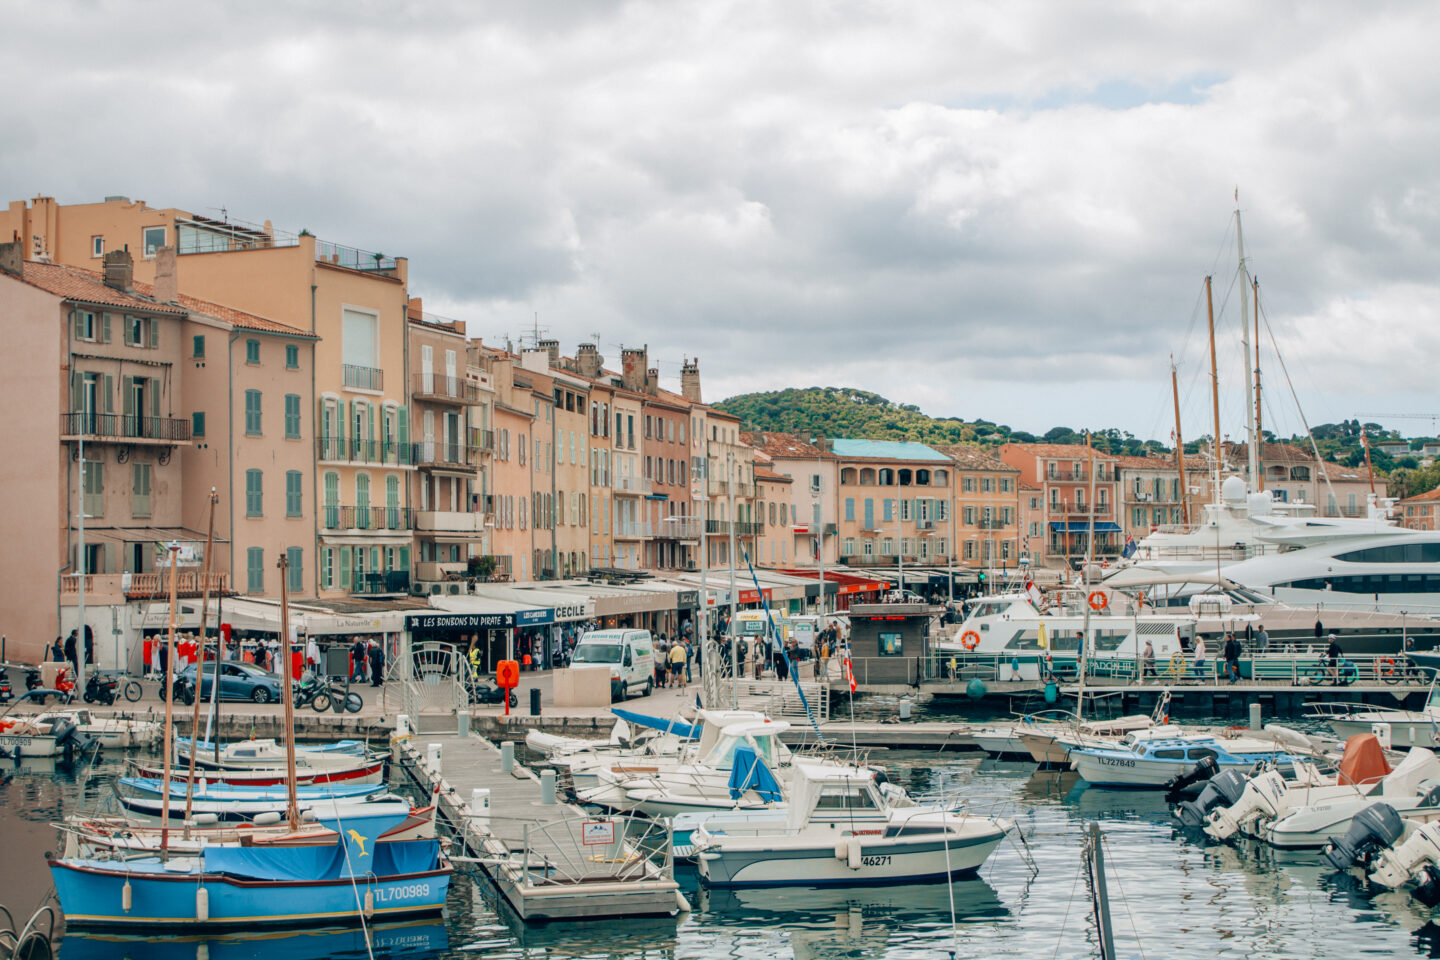 The seaside town and marina of Saint Tropez, France is fill with large yatchs, and colourful buildings in the summer months.